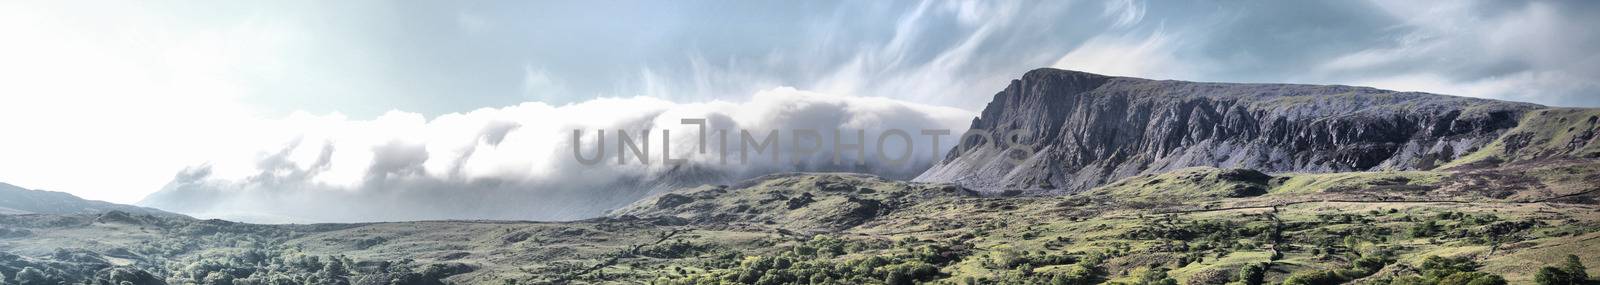 Stunning welsh mountains under a cloudy blue sky by chrisga